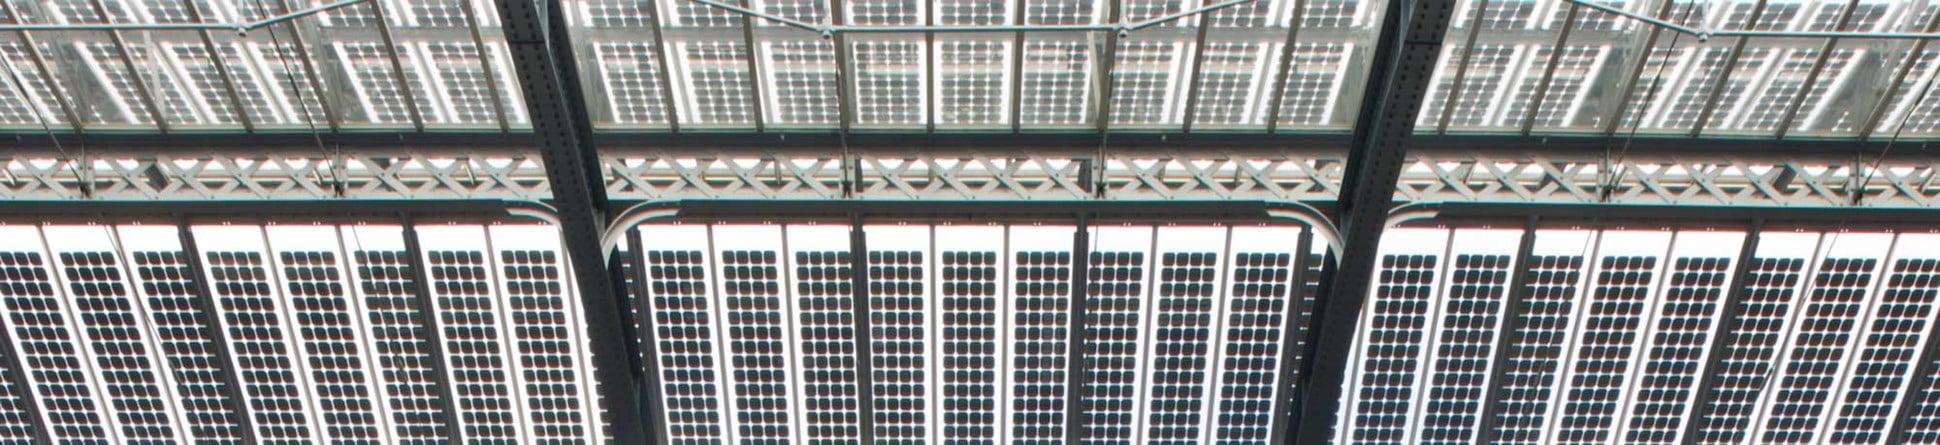 glass laminate rooftop showing photovoltaic cells